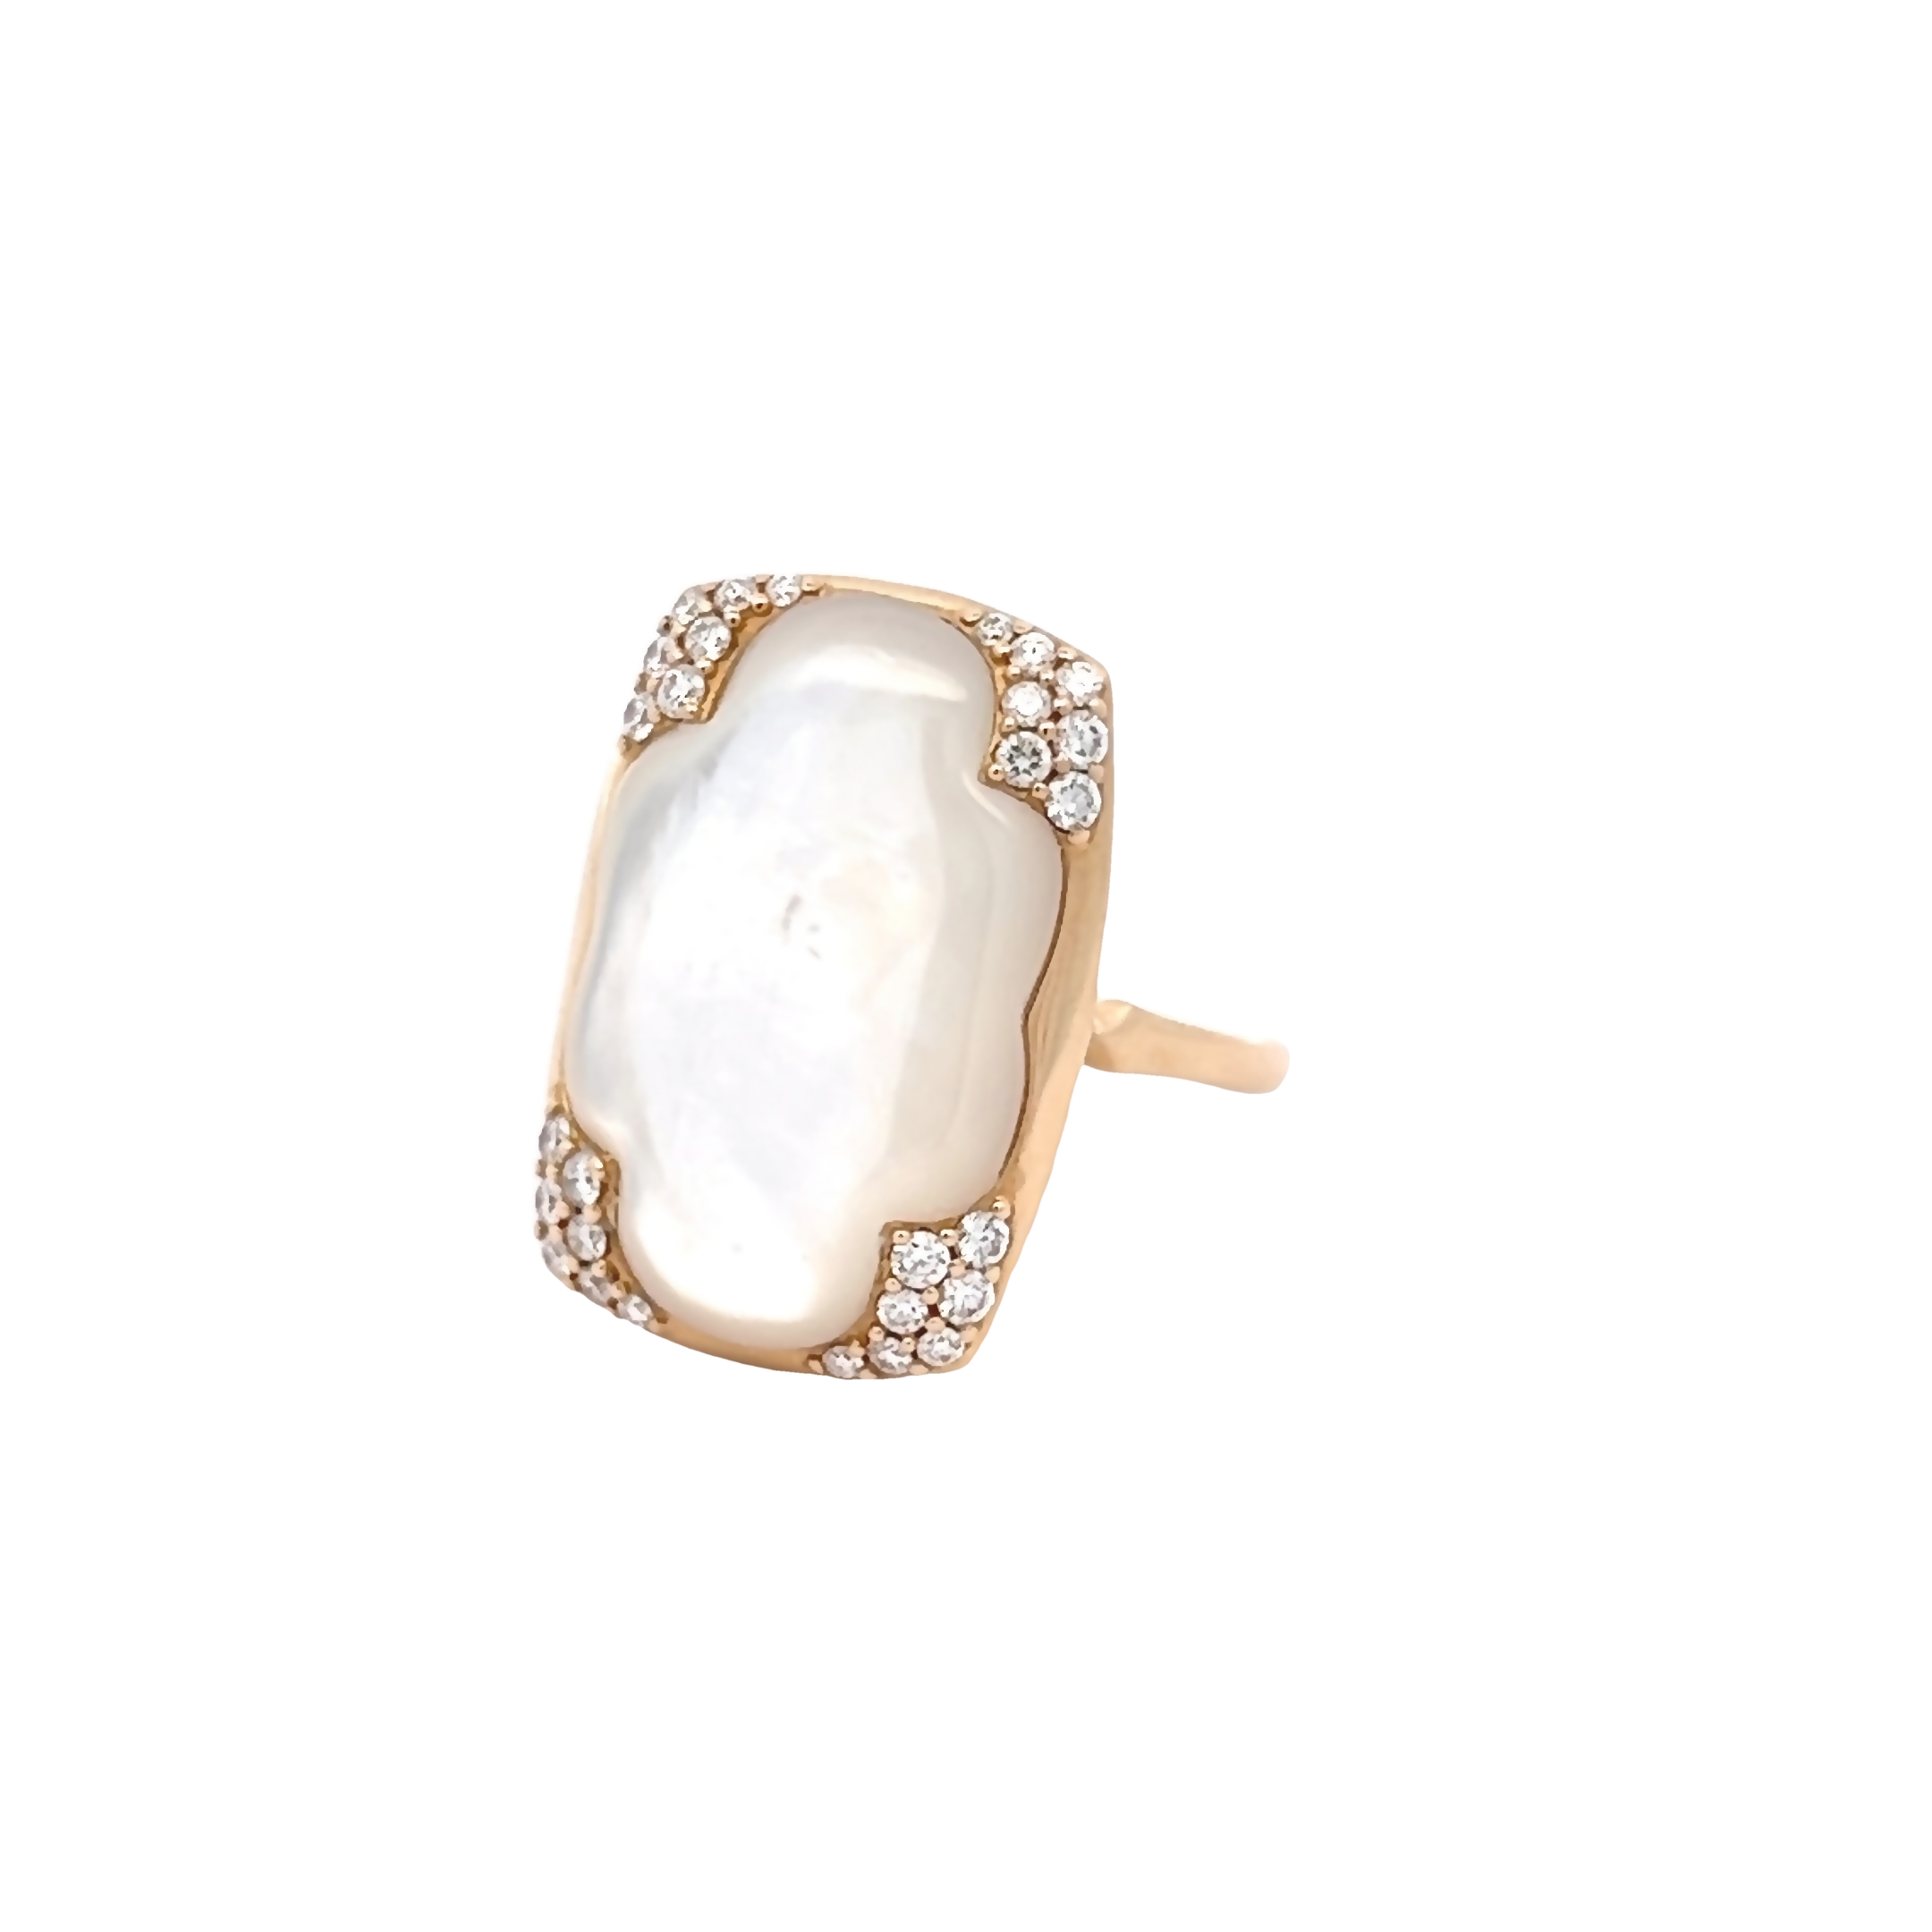 14 Karat yellow gold ring with 28=0.36 total weight round brilliant G VS Diamonds and white Mother of Pearl inlay. Size 8.